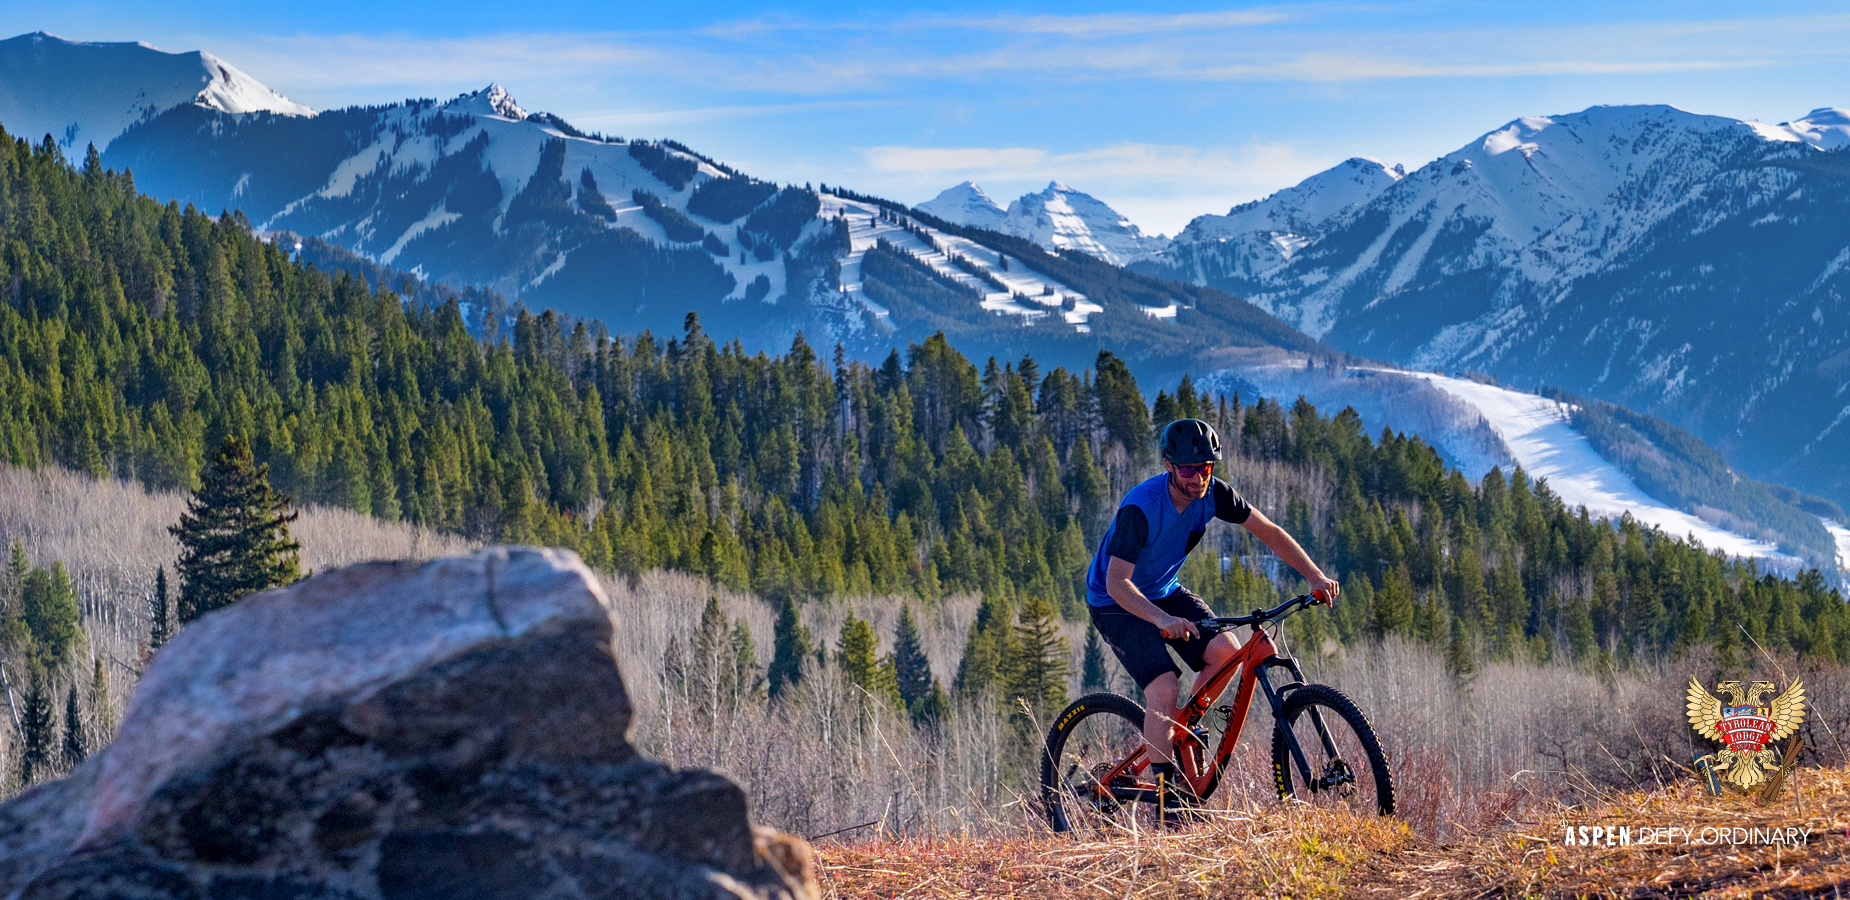 Miles of mountain bike trails overlook the Elks Mountains